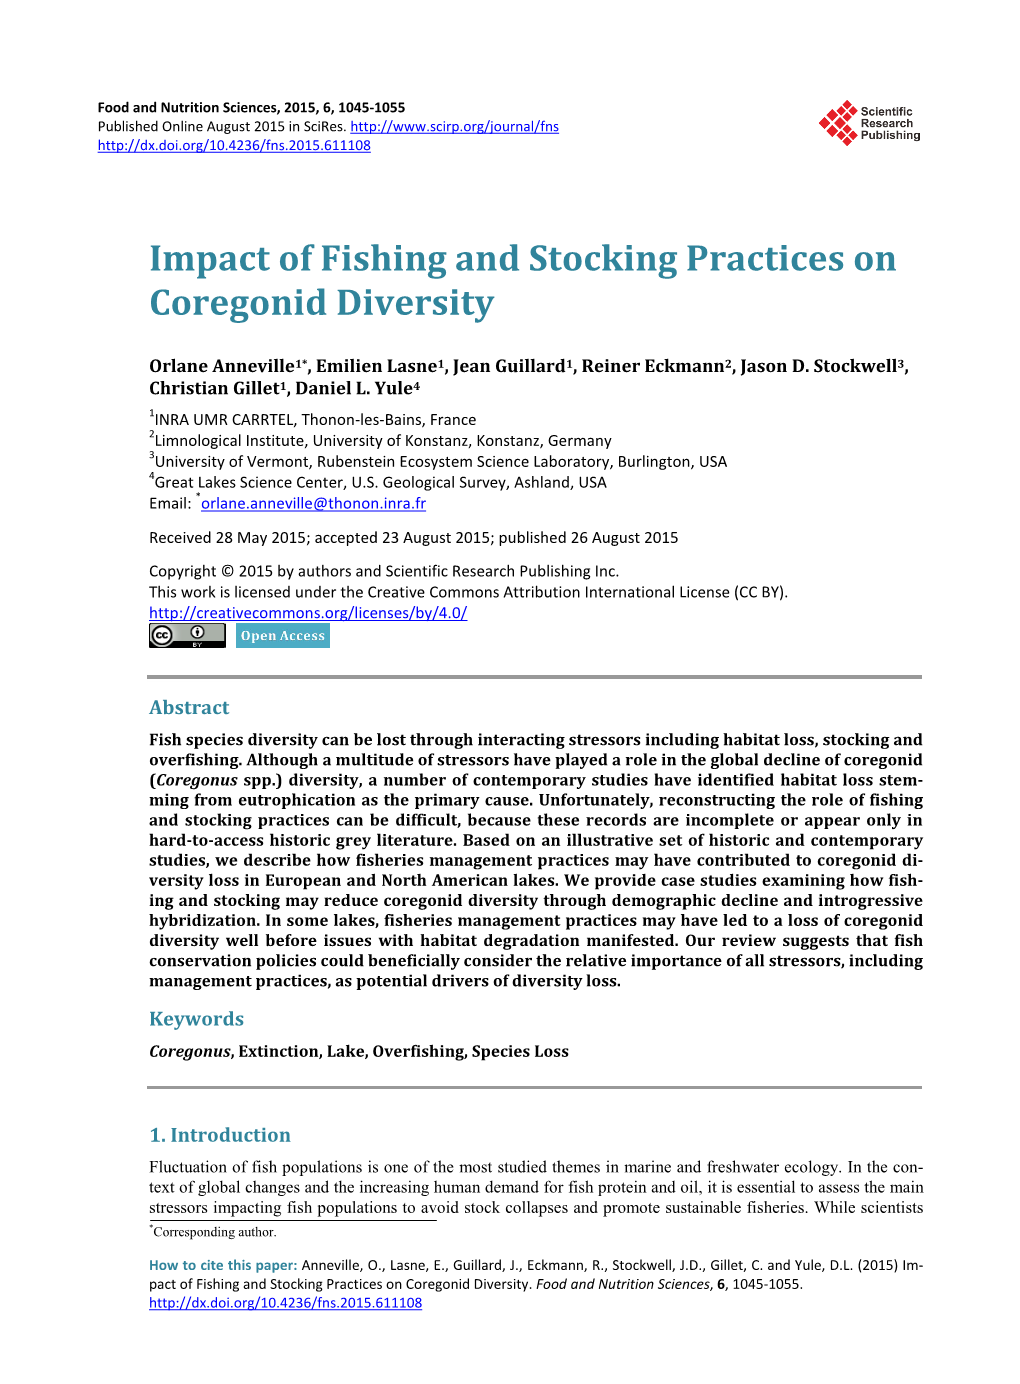 Impact of Fishing and Stocking Practices on Coregonid Diversity